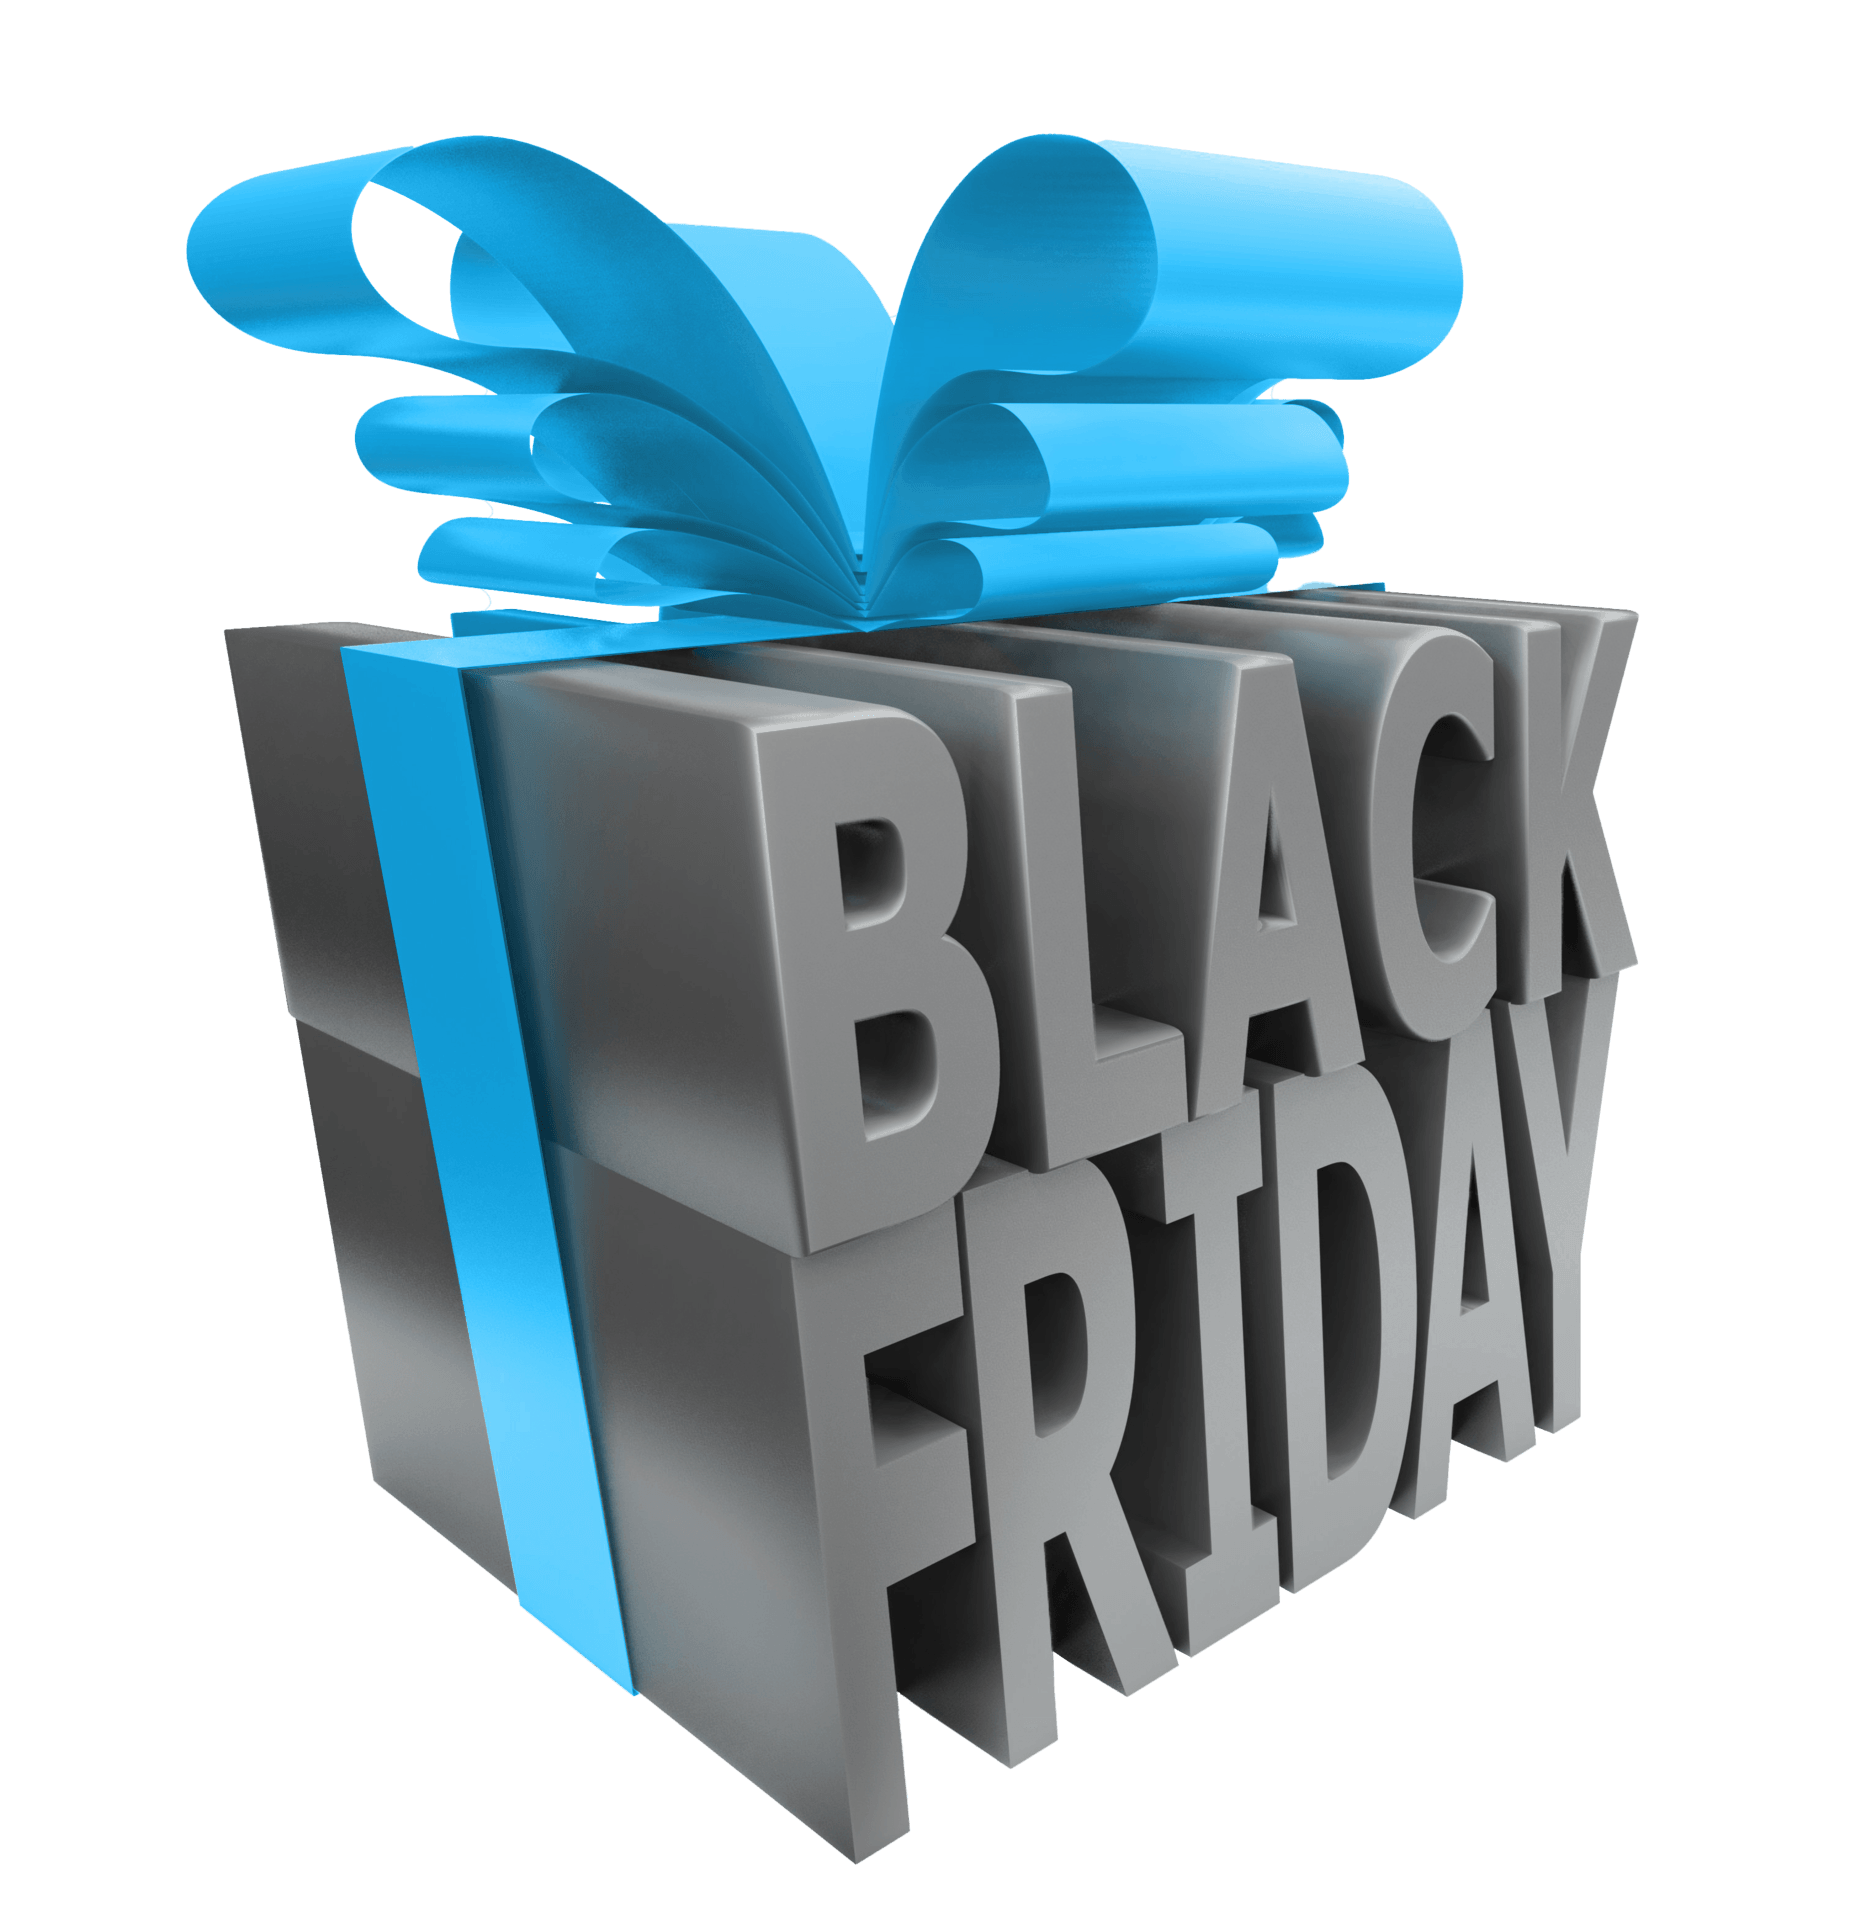 A black friday gift box with a blue bow